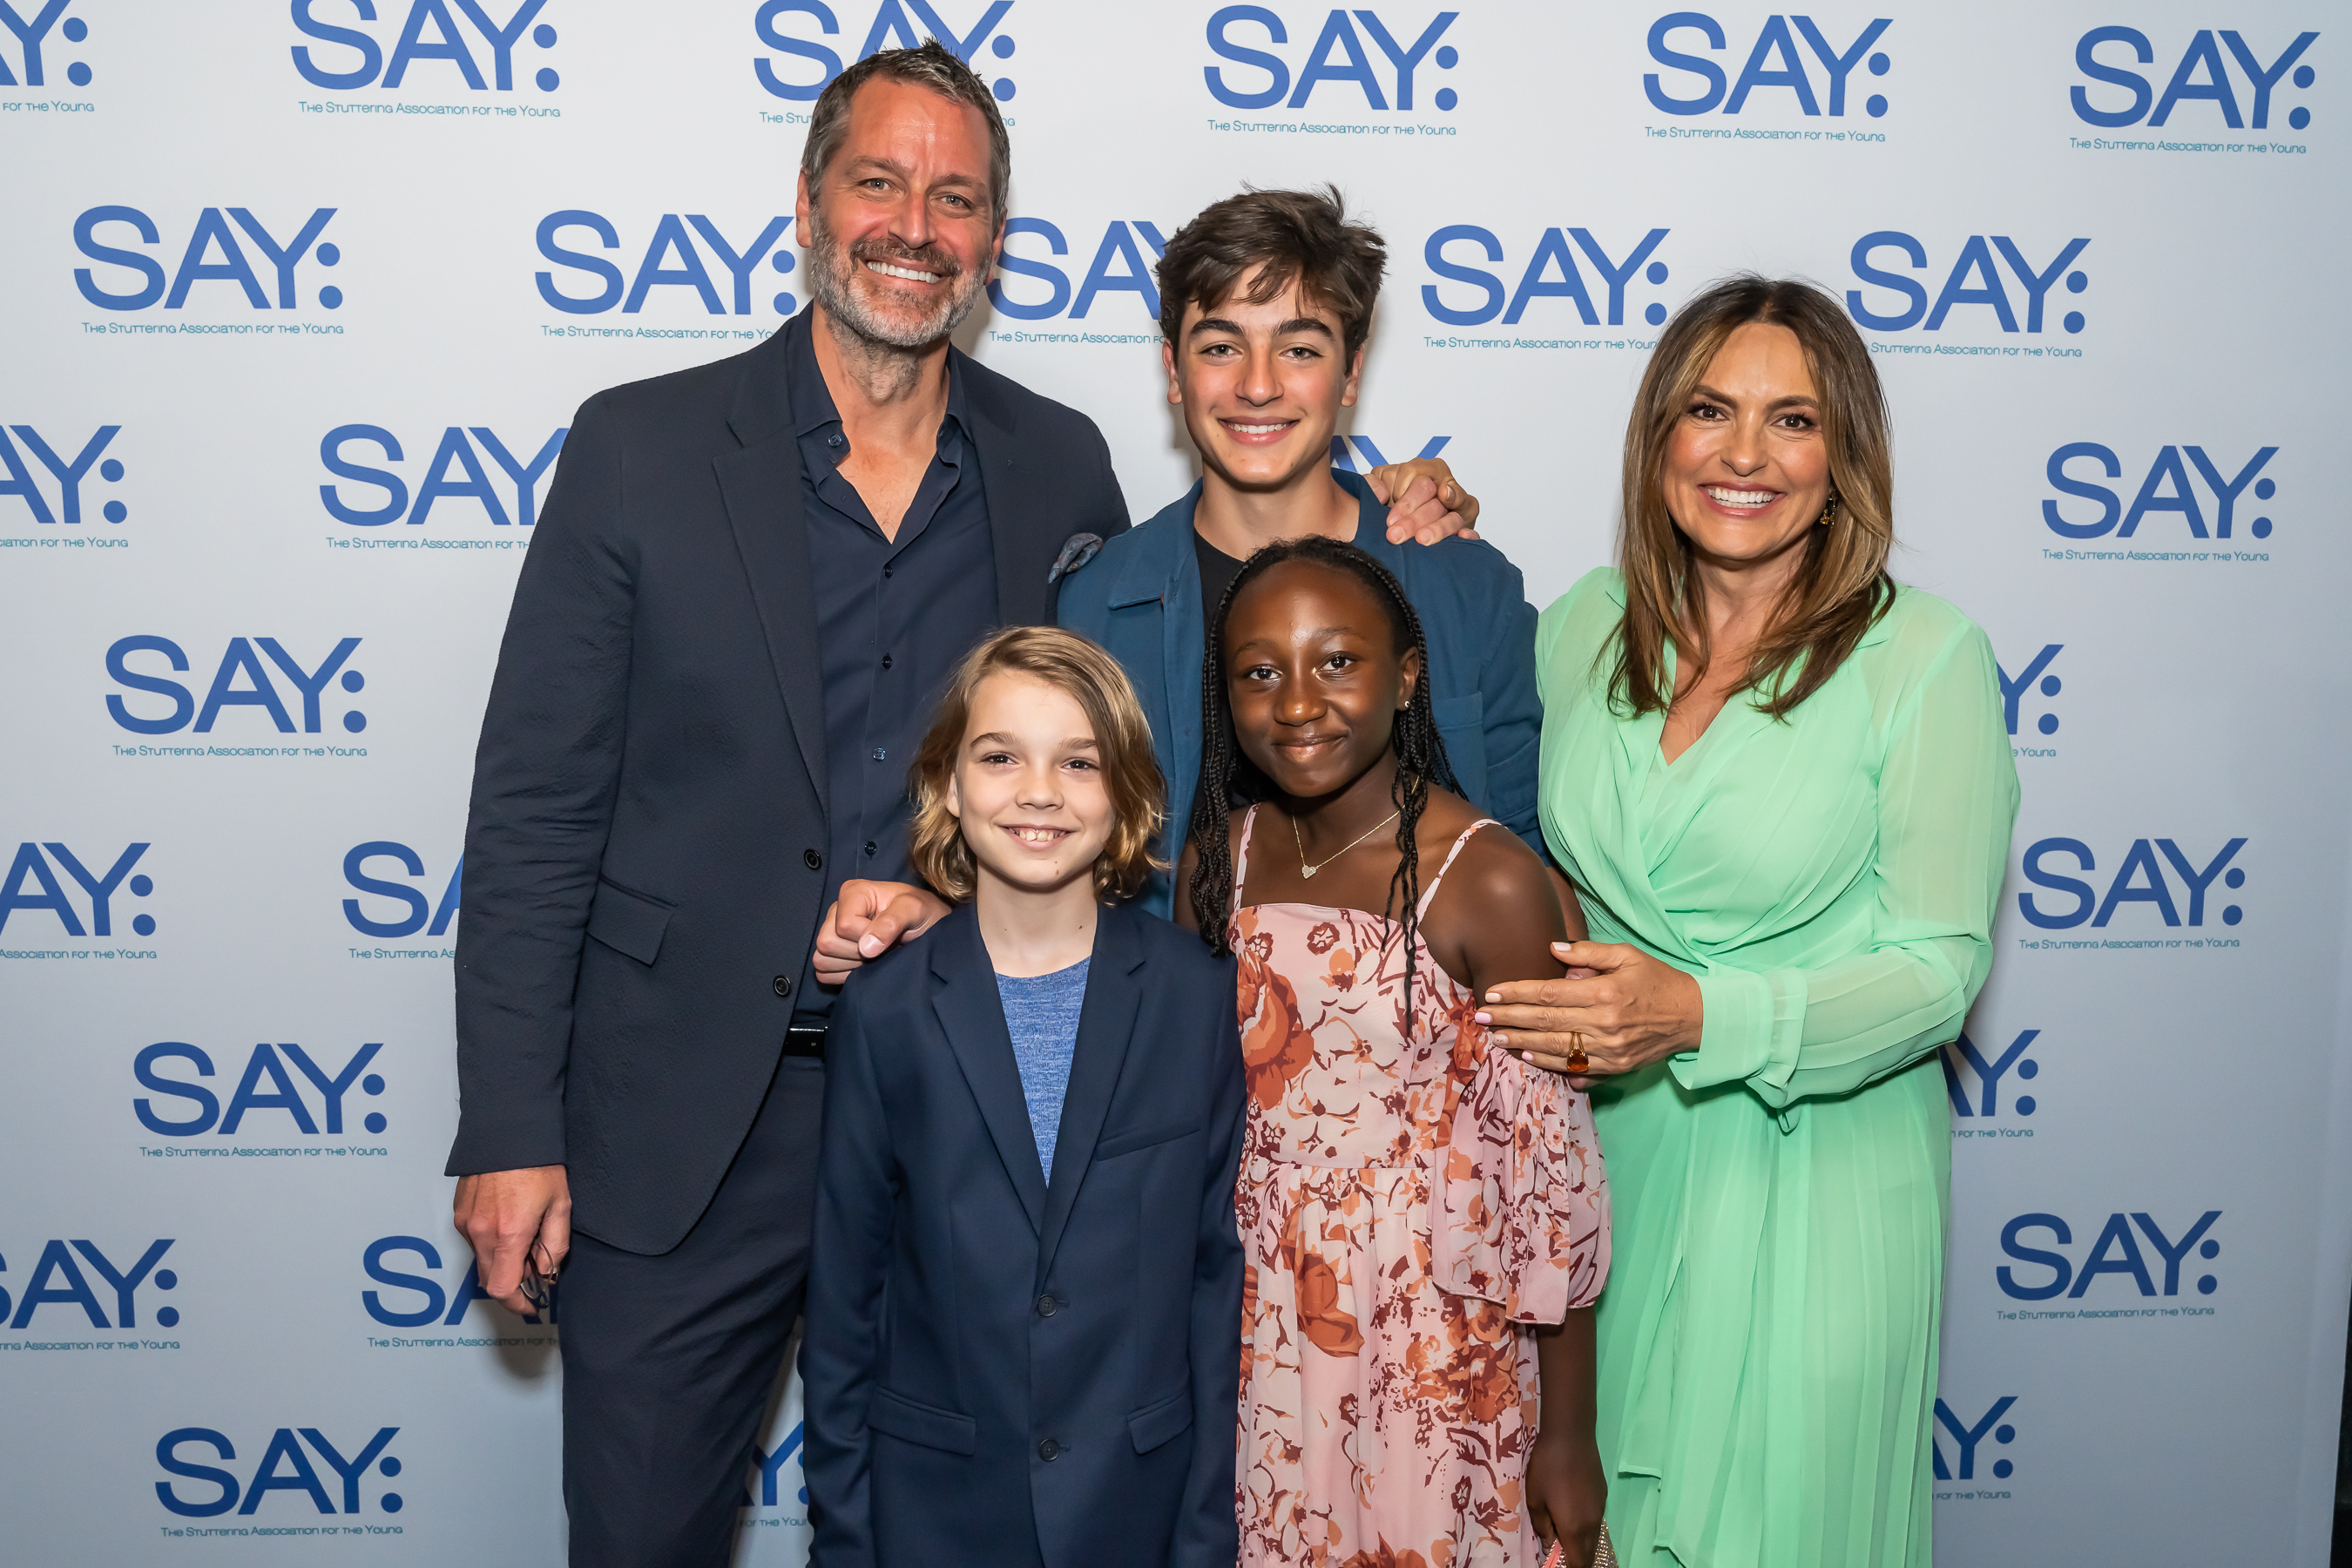 Mariska Hargitay and Family Are All Smiles in Photos From Rare Red Carpet Appearance